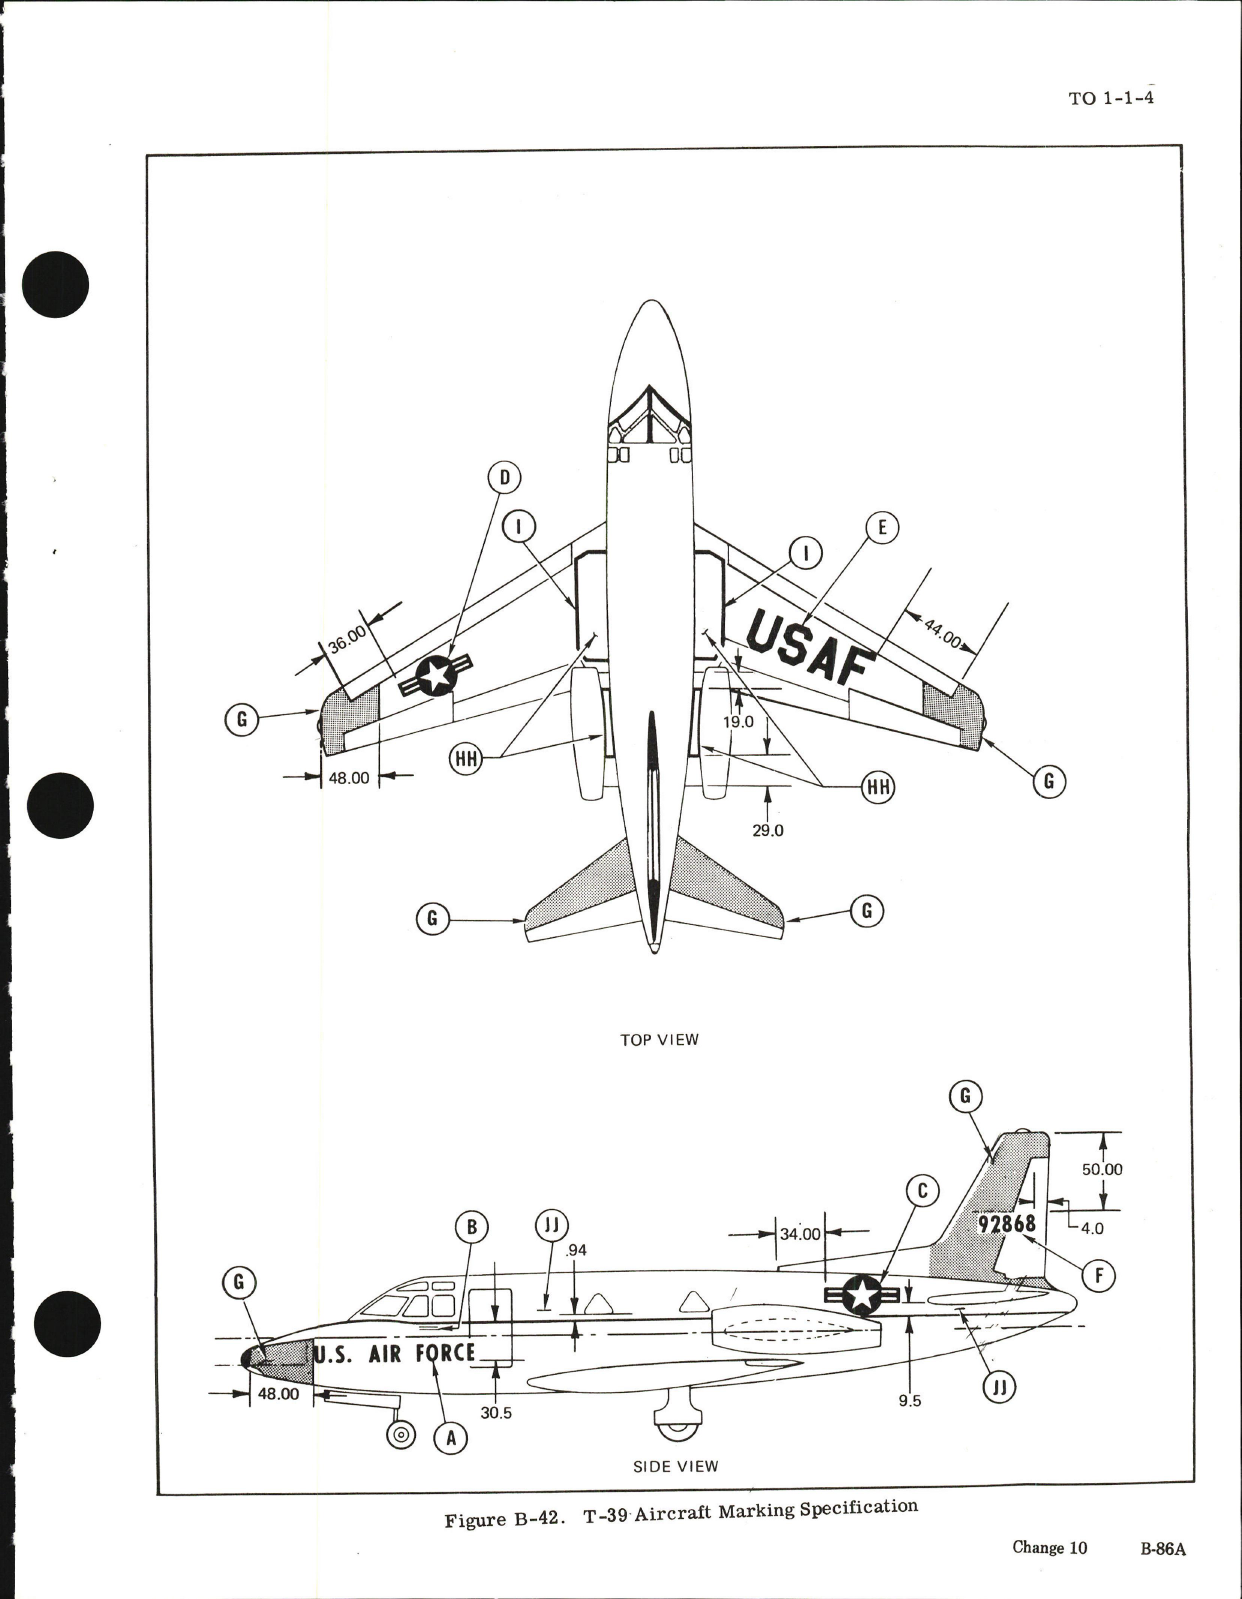 Sample page 9 from AirCorps Library document: Exterior Finishes, Insignia and Markings for USAF Aircraft - Change - 10